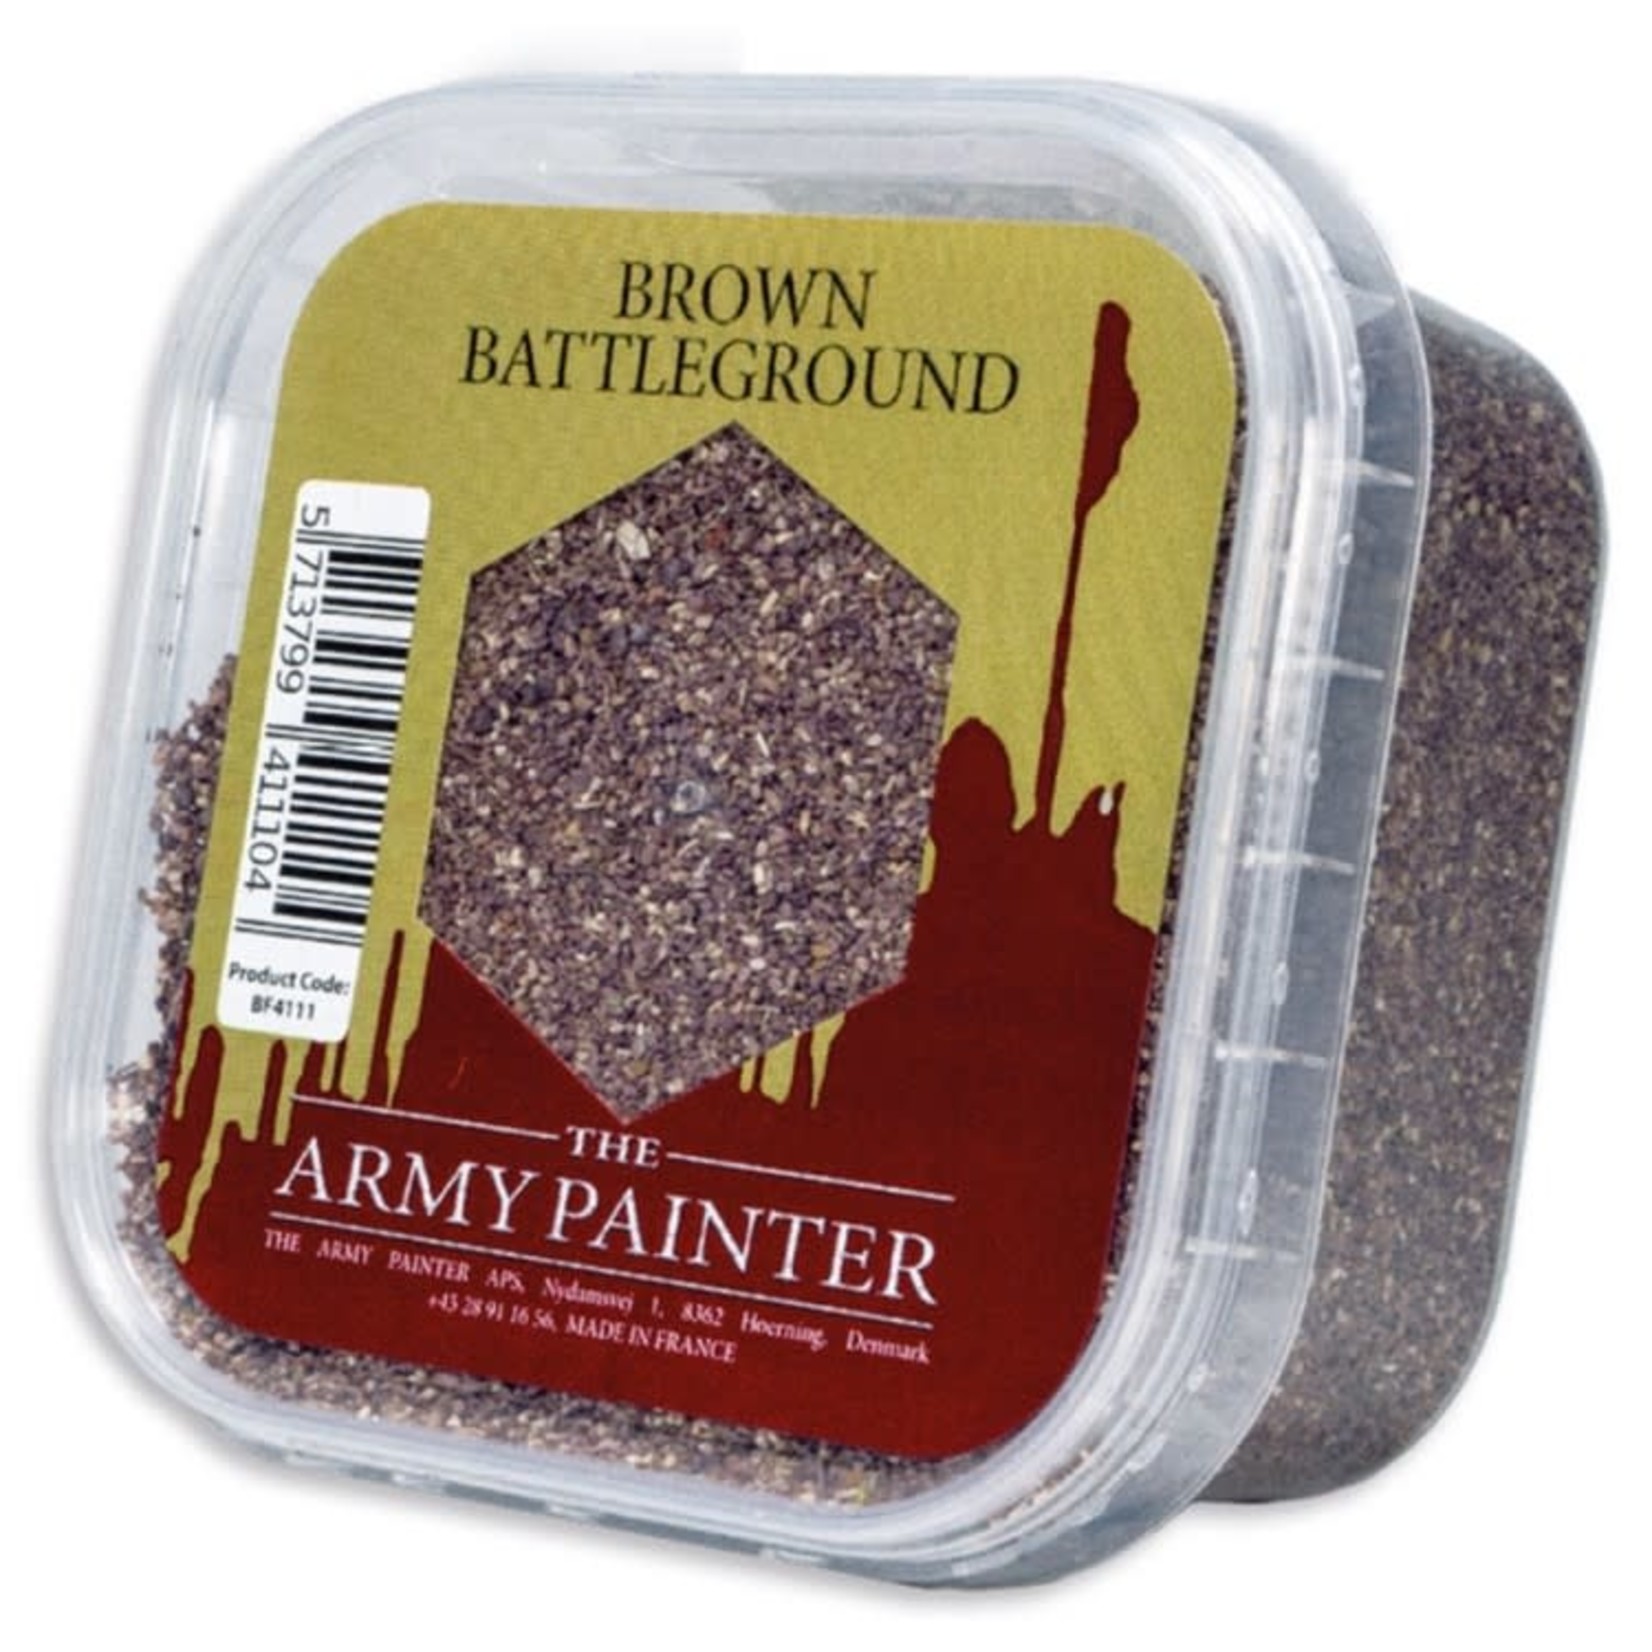 The Army Painter The Army Painter: Basing Brown Battleground